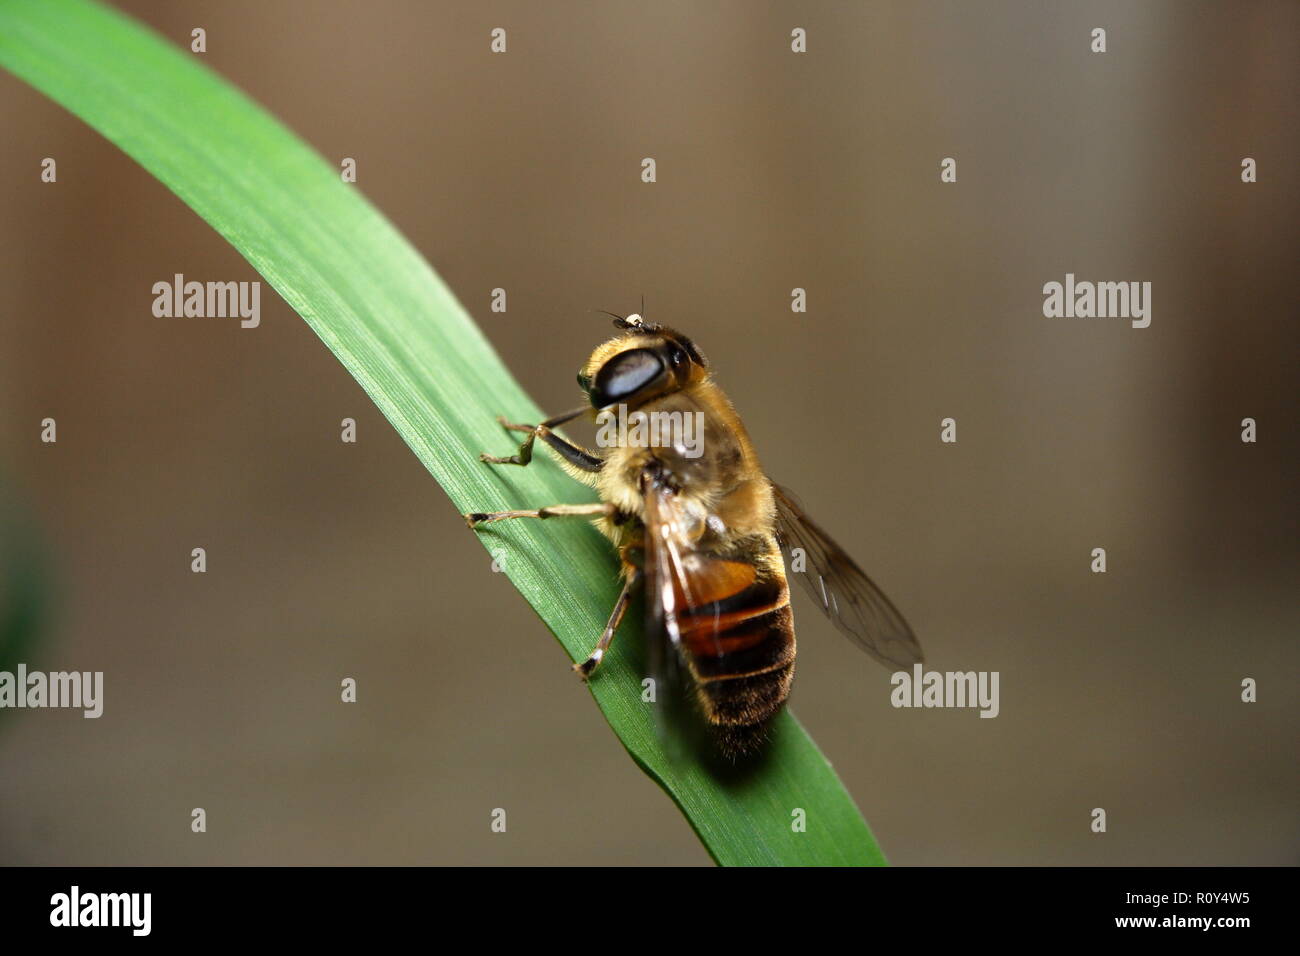 Australian Native Bee resting on a blade of green grass Stock Photo